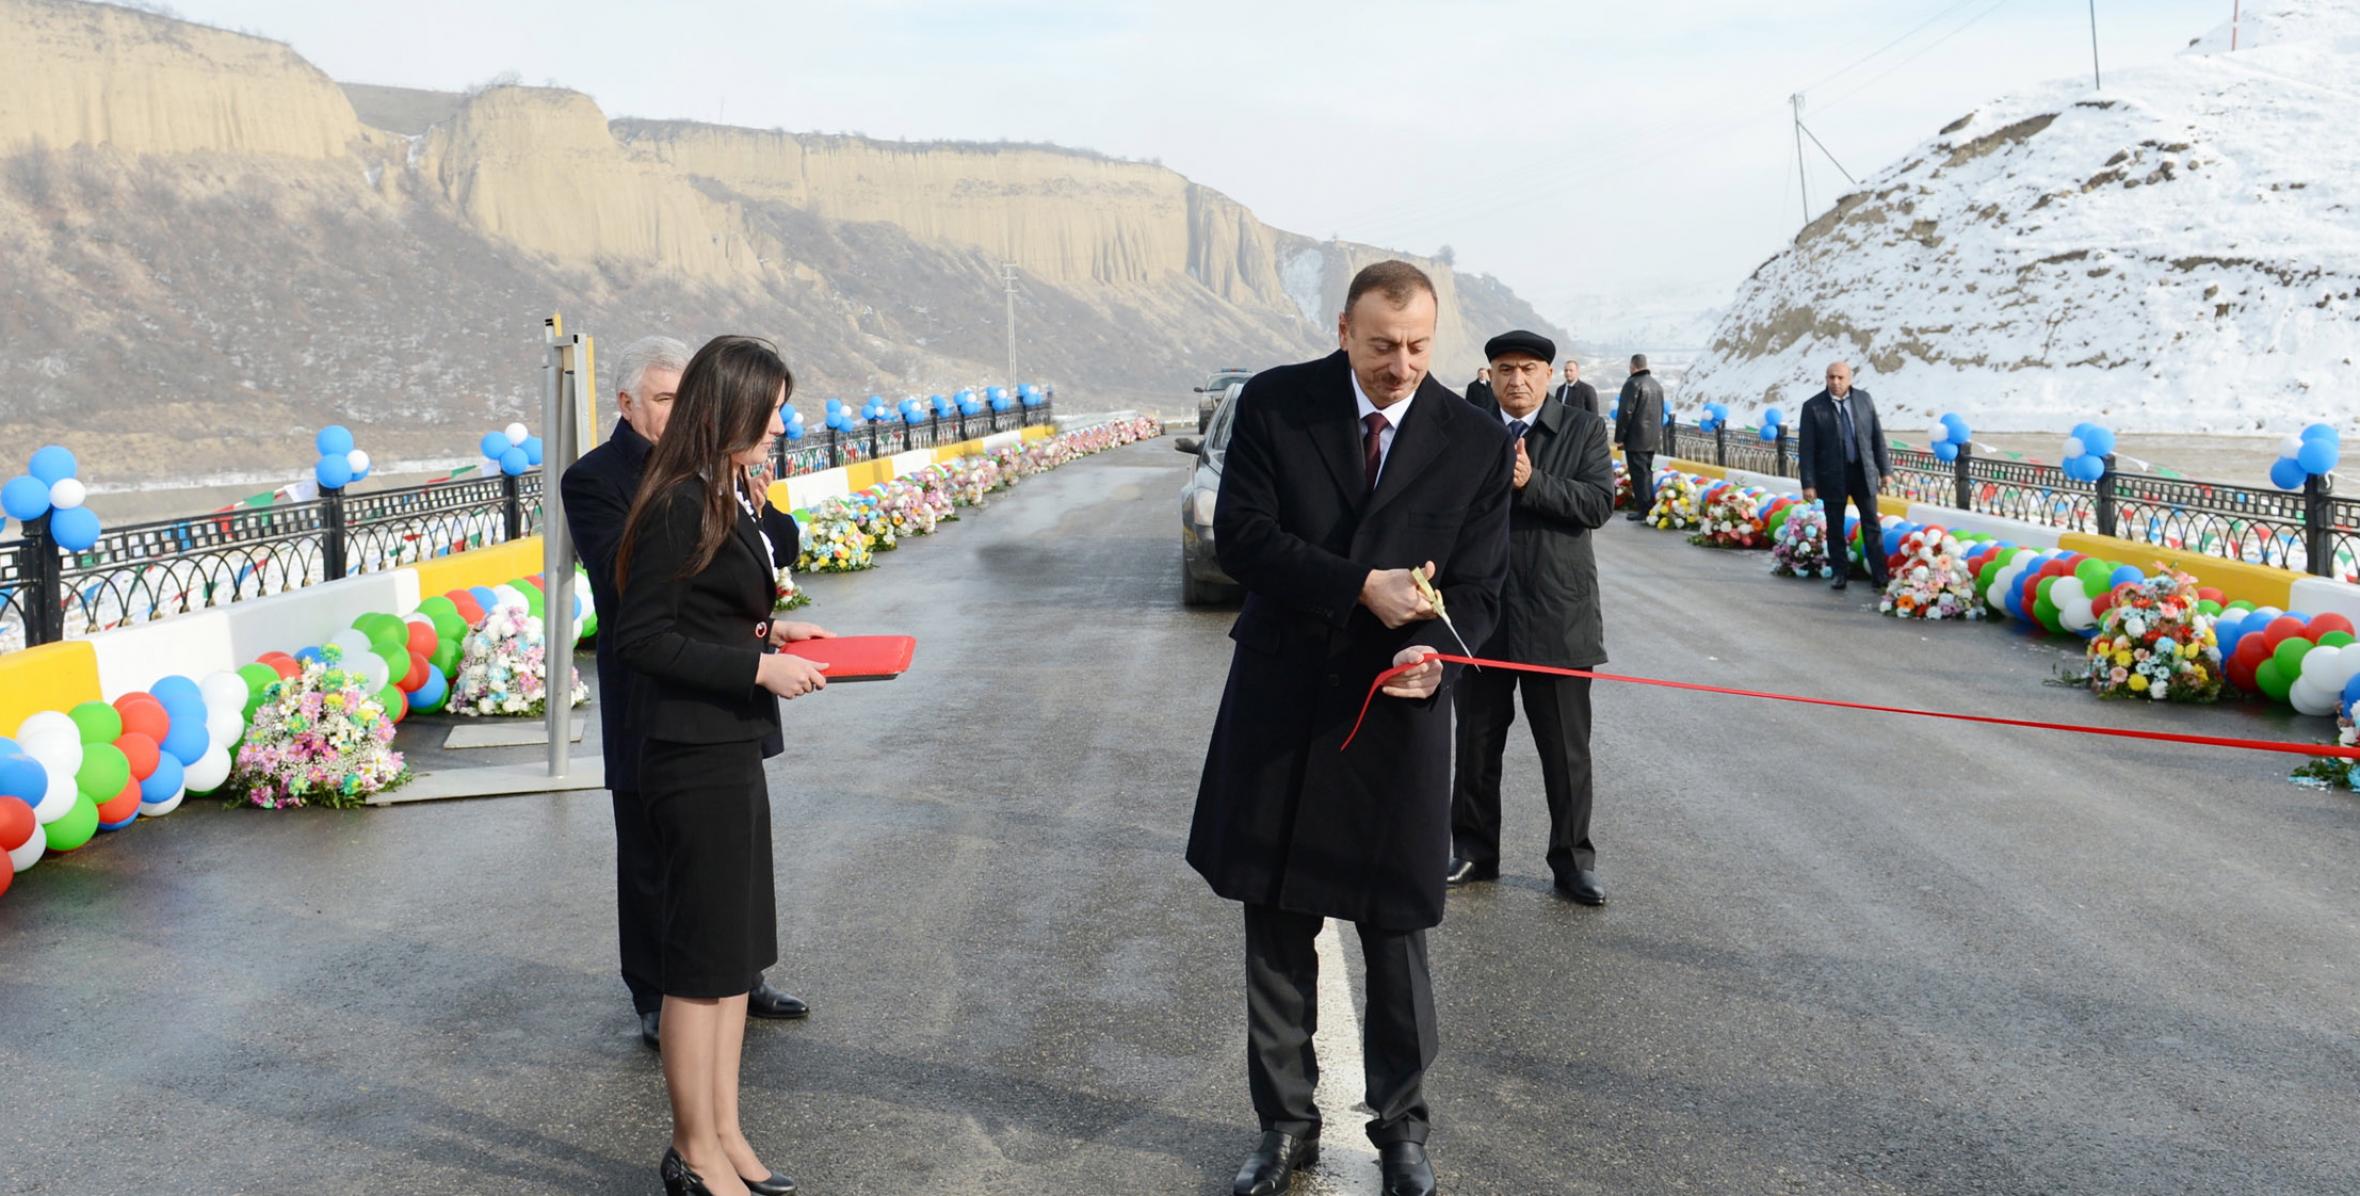 Ilham Aliyev attended the opening of the Gusar-Laza motor road